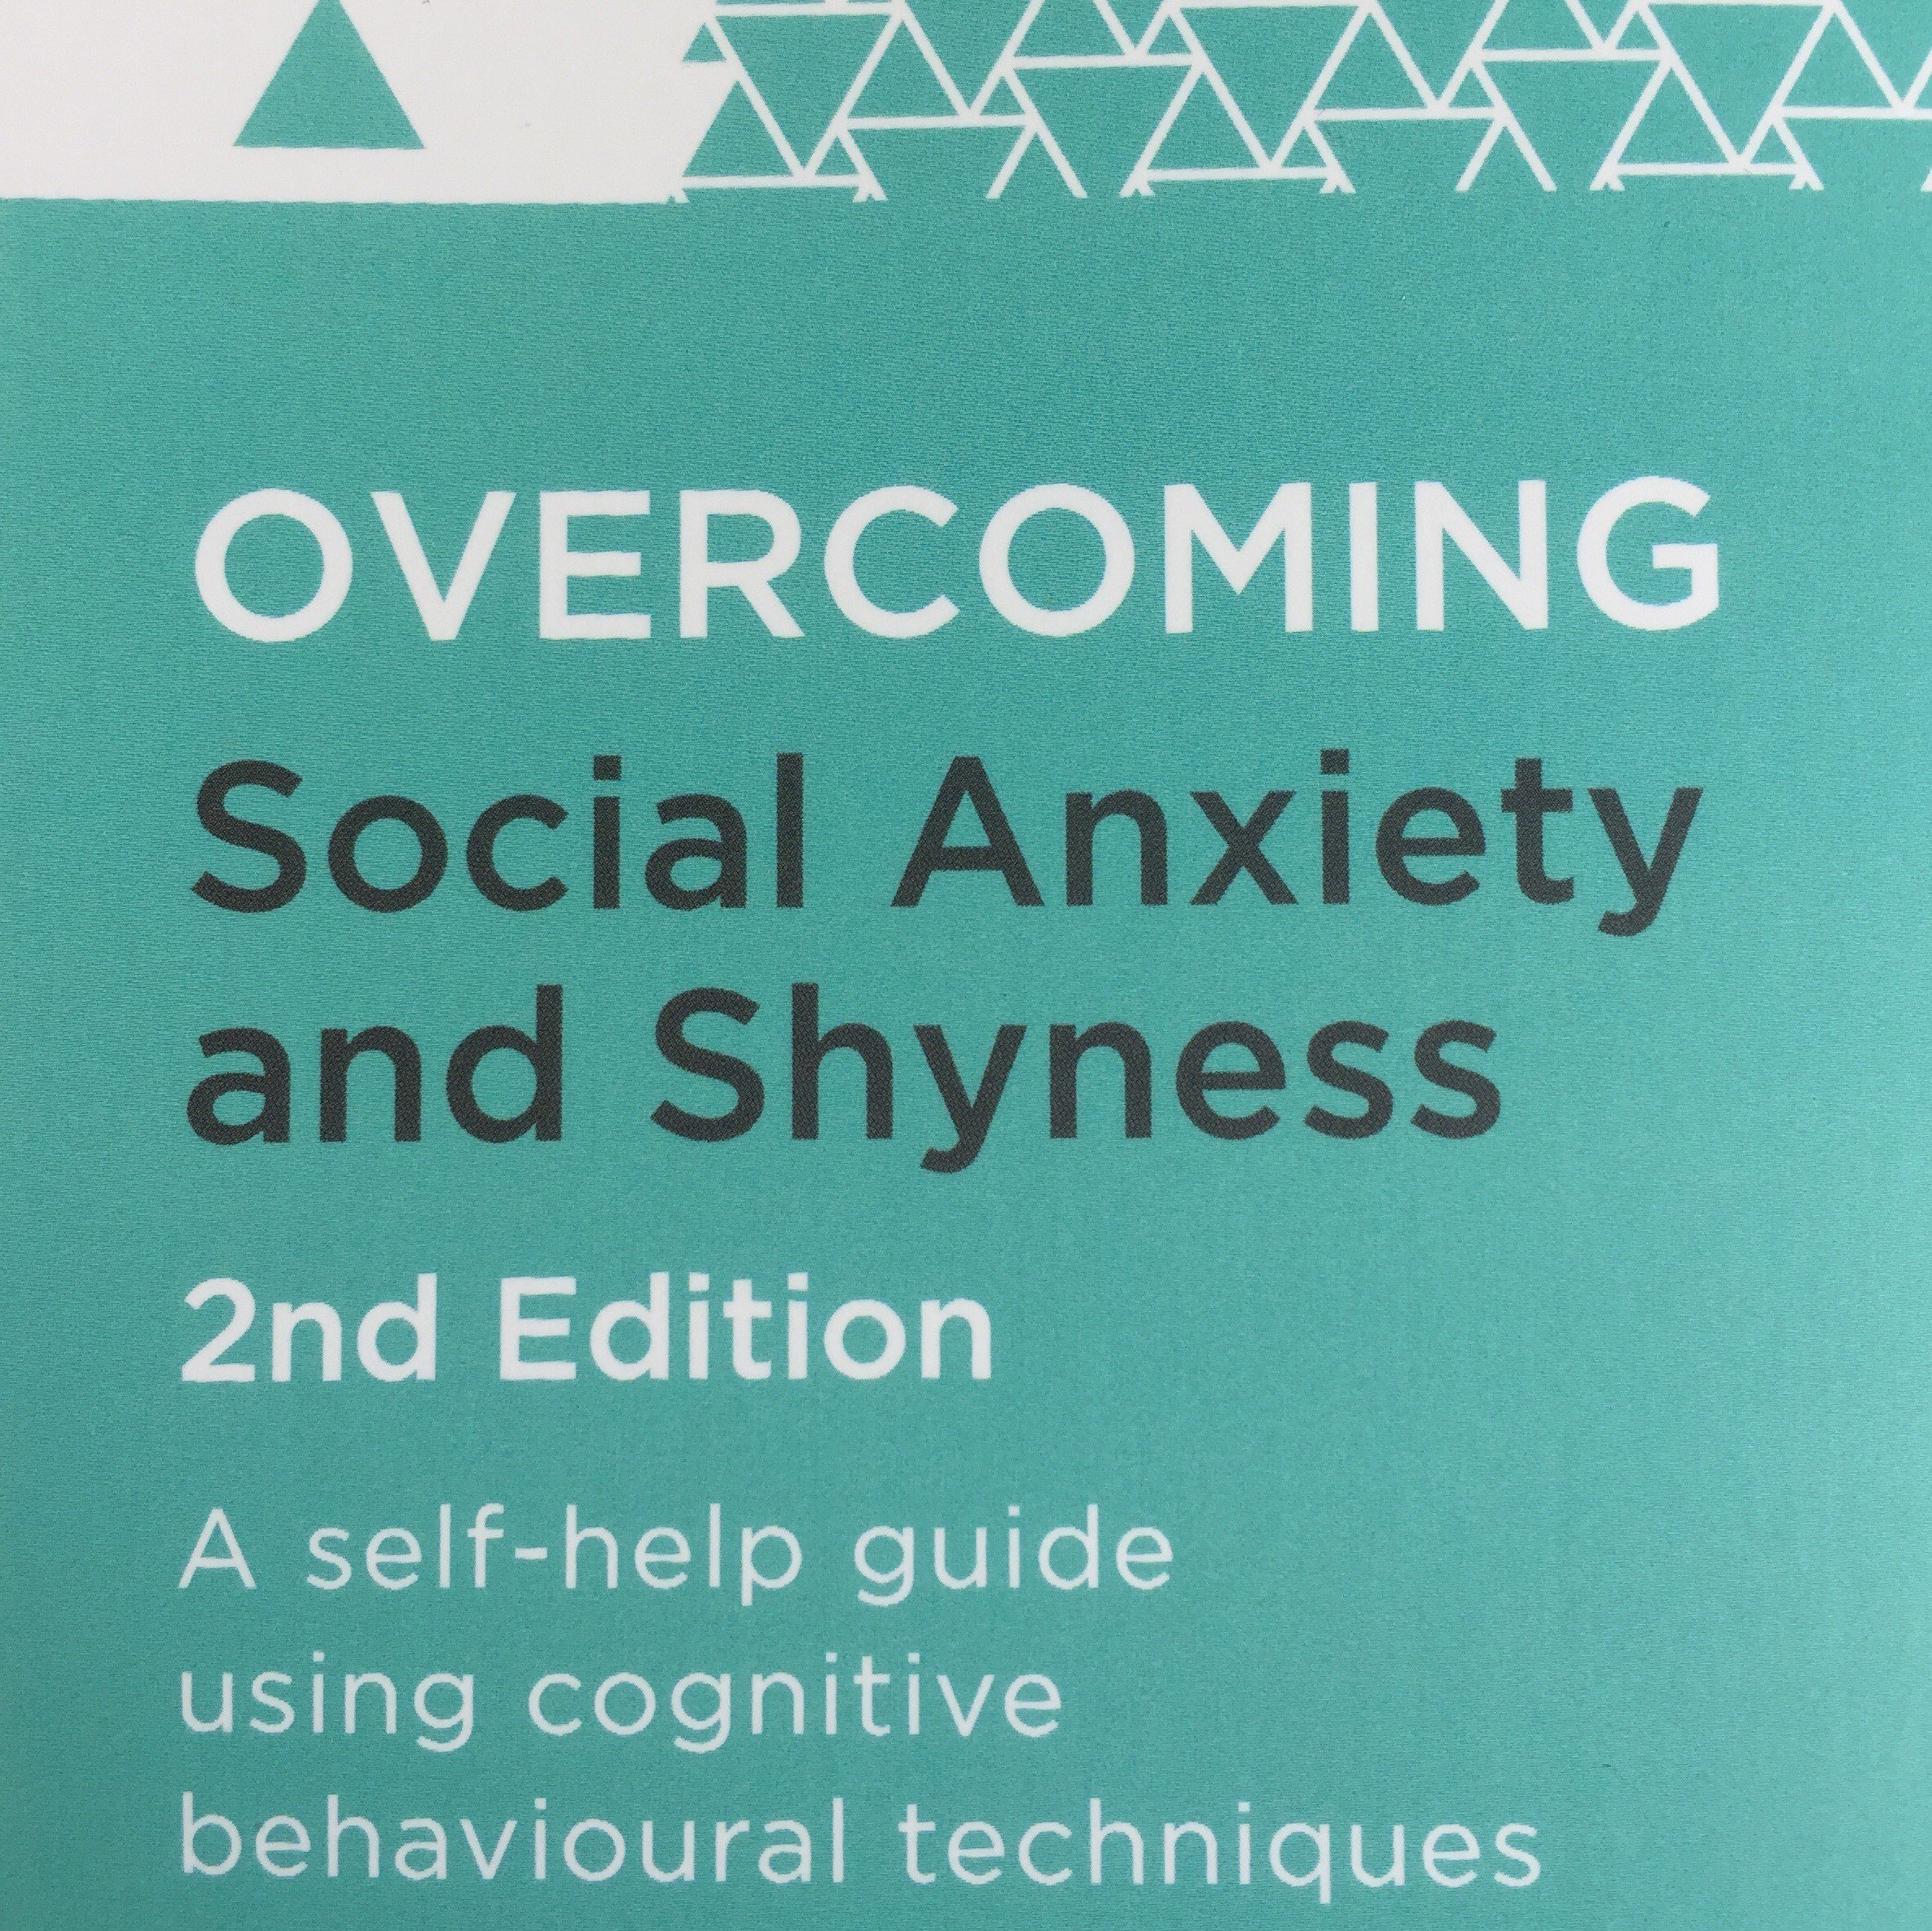 Shyness　Social　Anxiety　Edition)　by　UK　Gillian　(2nd　Overcoming　and　Anxiety　Butler